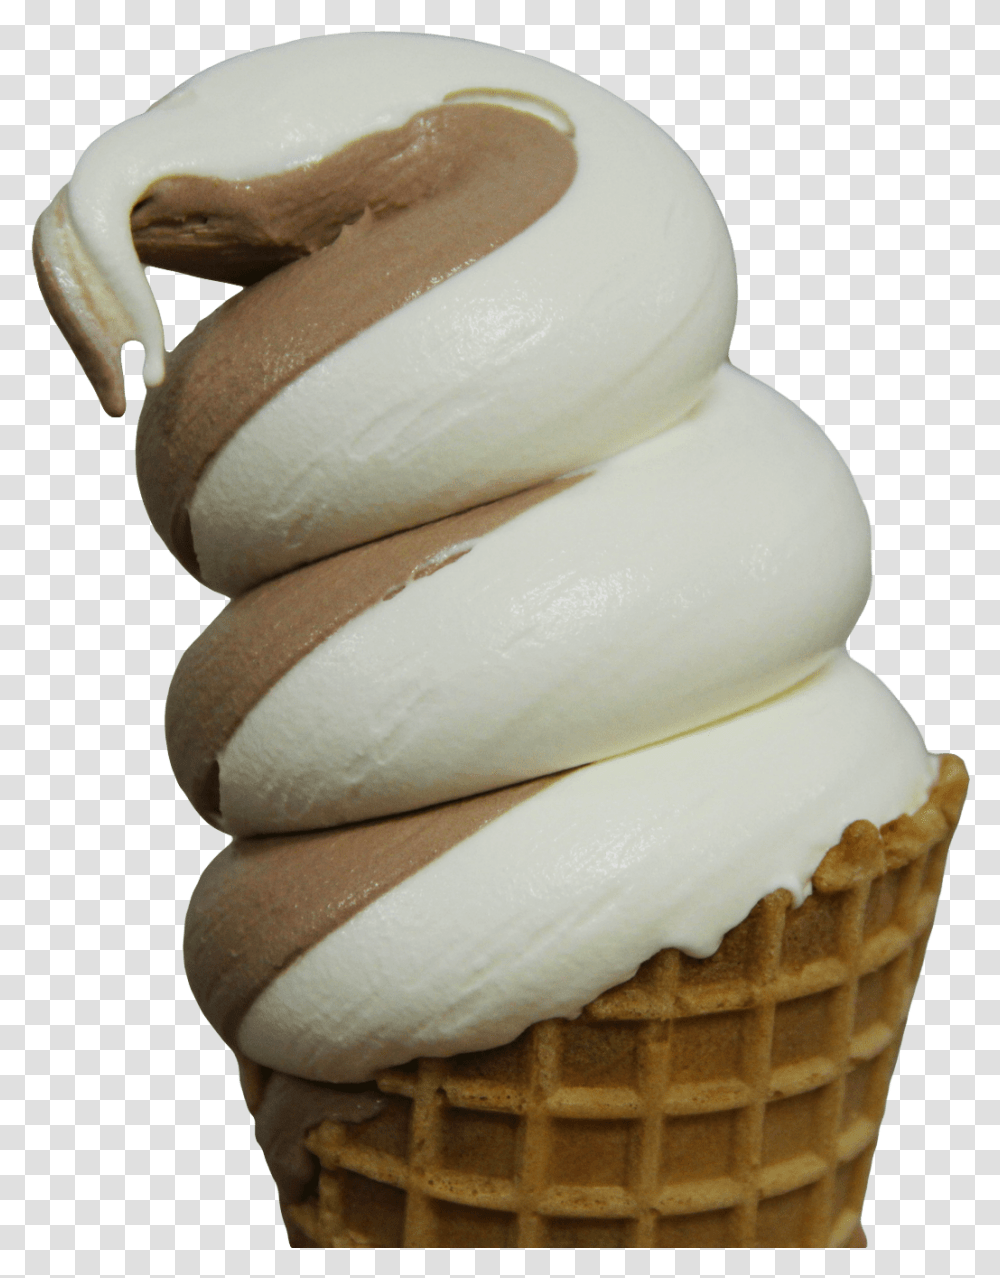 Free Cecilquots Frozen Custard Ice Cream Cone, Dessert, Food, Creme, Sweets Transparent Png